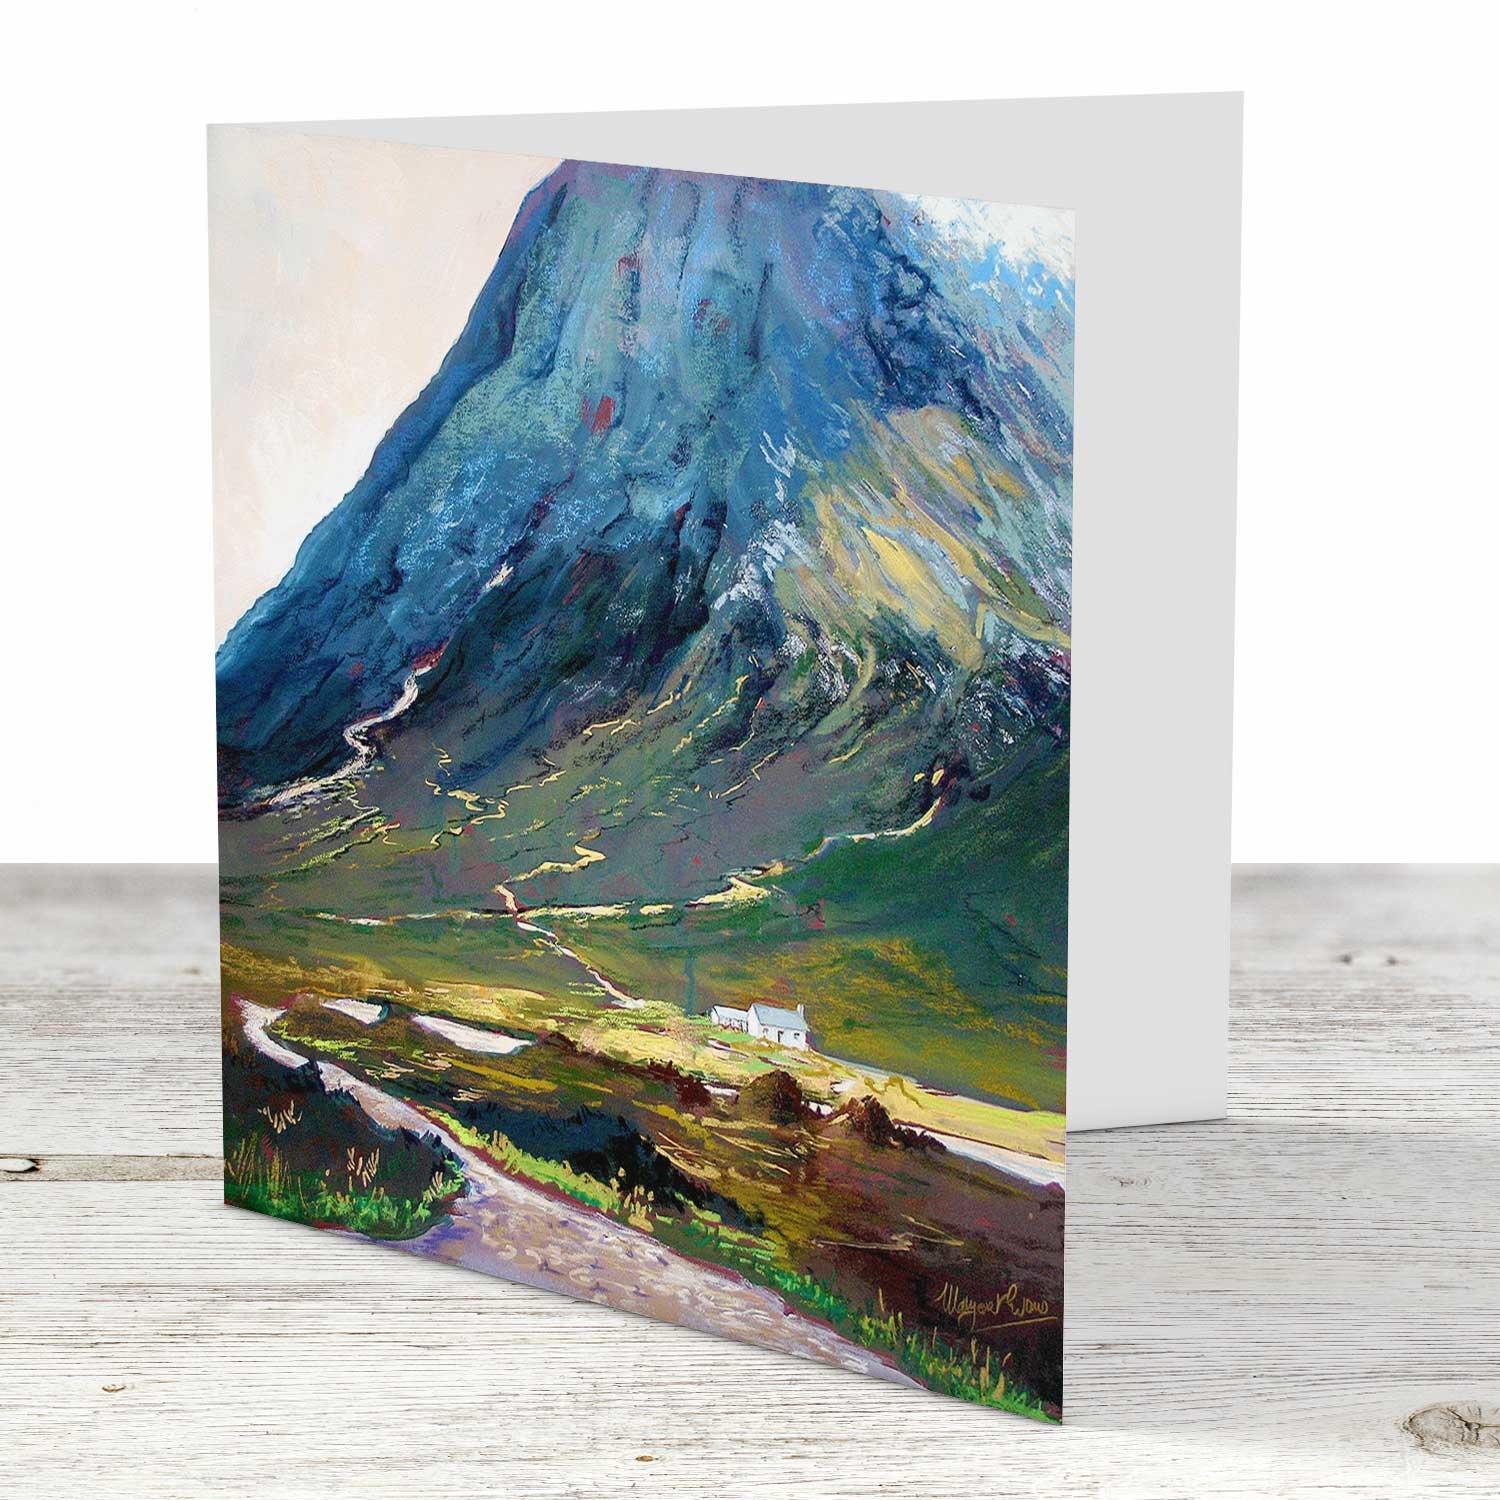 Below Buachaille Greeting Card from an original painting by artist Margaret Evans